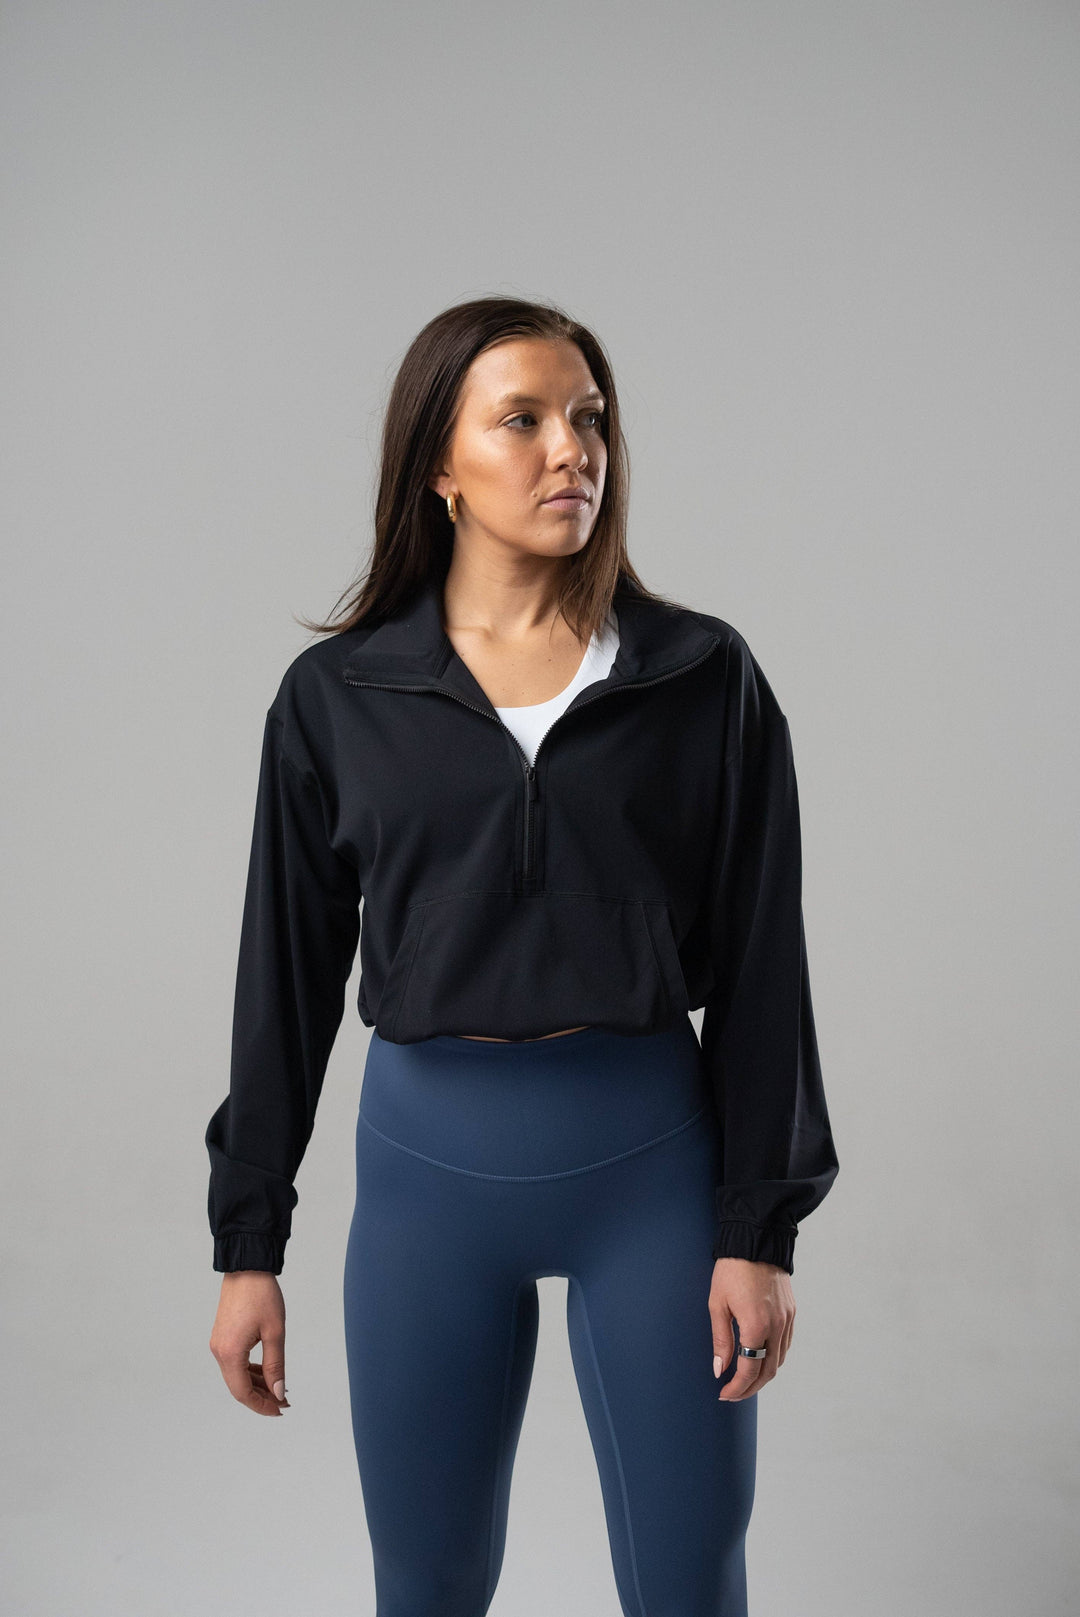 Alyth Active - Breaking free gravity pullover WOMEN